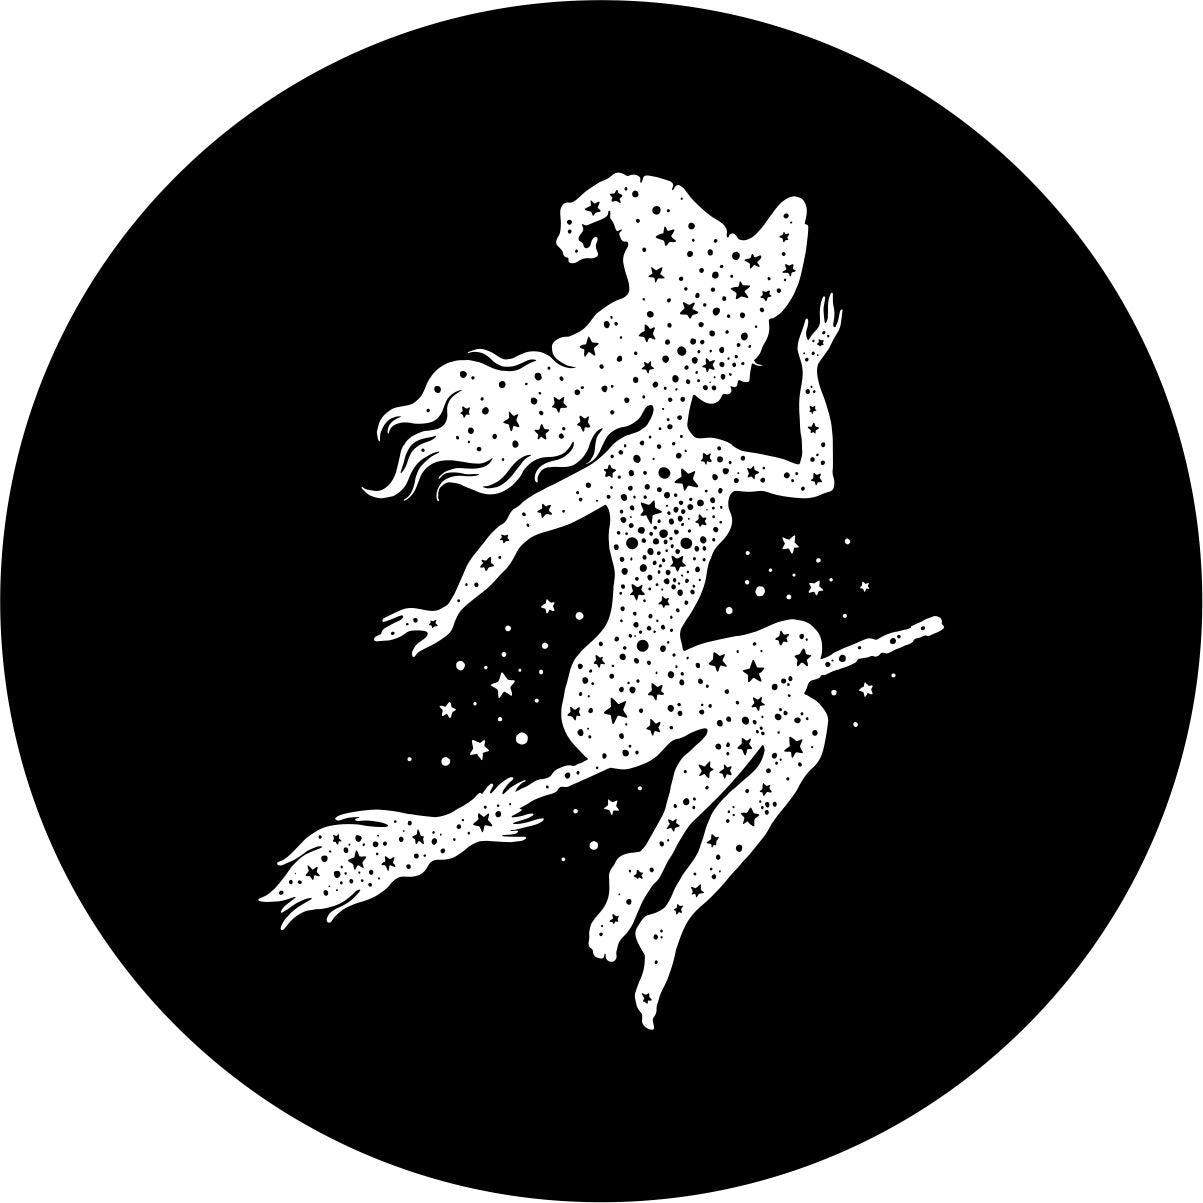 Stars fill the silhouette of a witch sitting upon and flying on a broom stick design spare tire cover for Jeep, Camper, RV, Bronco, Van, and more.